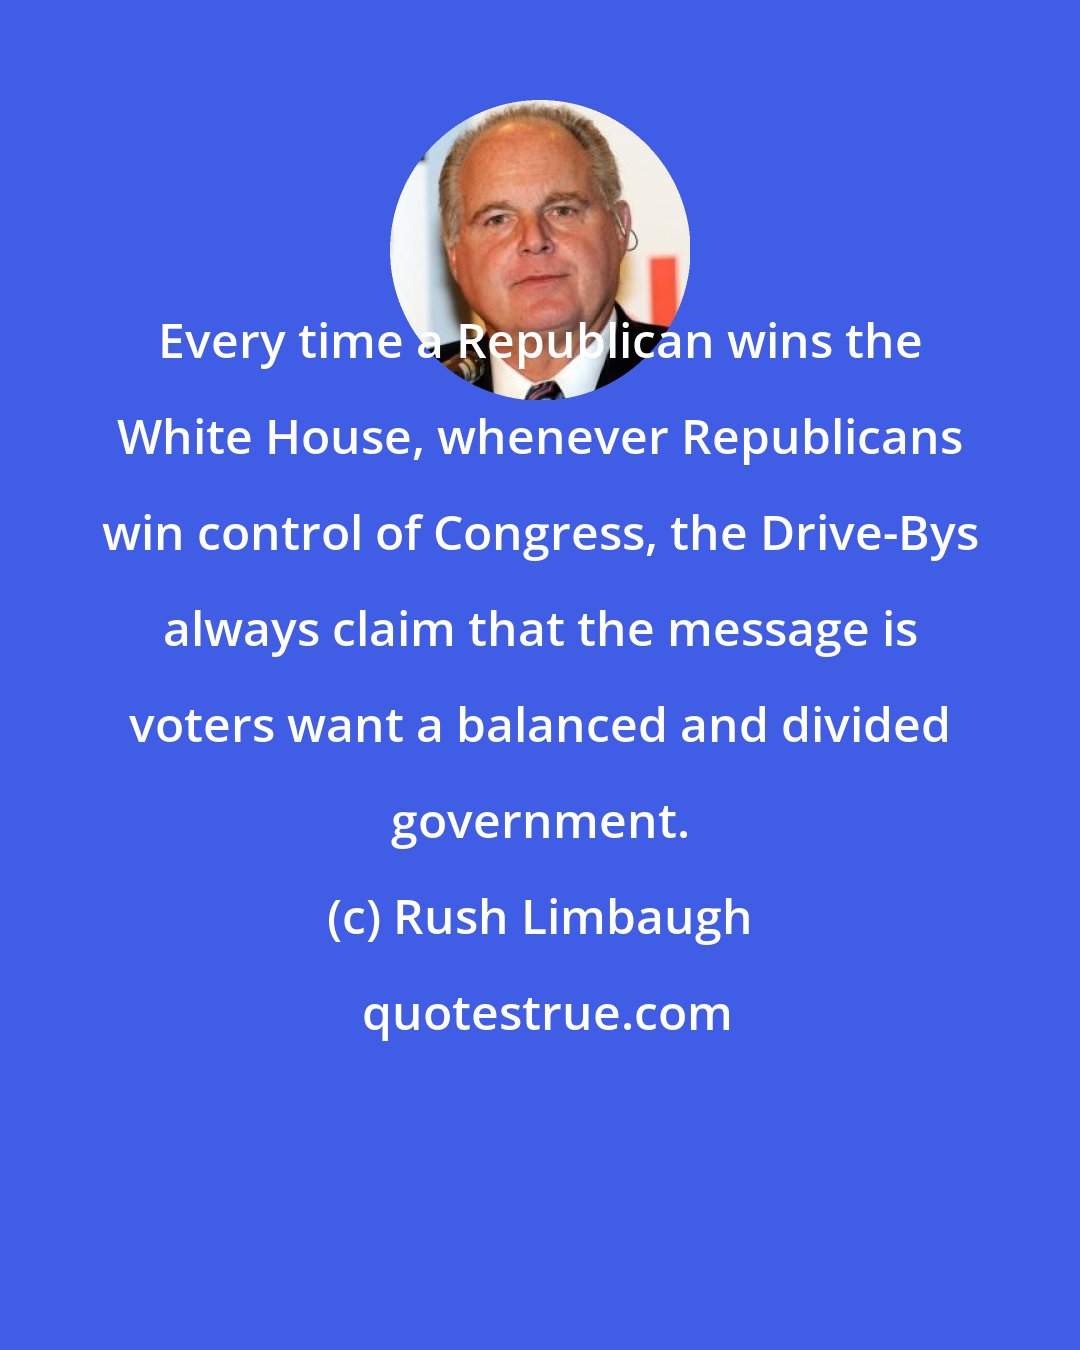 Rush Limbaugh: Every time a Republican wins the White House, whenever Republicans win control of Congress, the Drive-Bys always claim that the message is voters want a balanced and divided government.